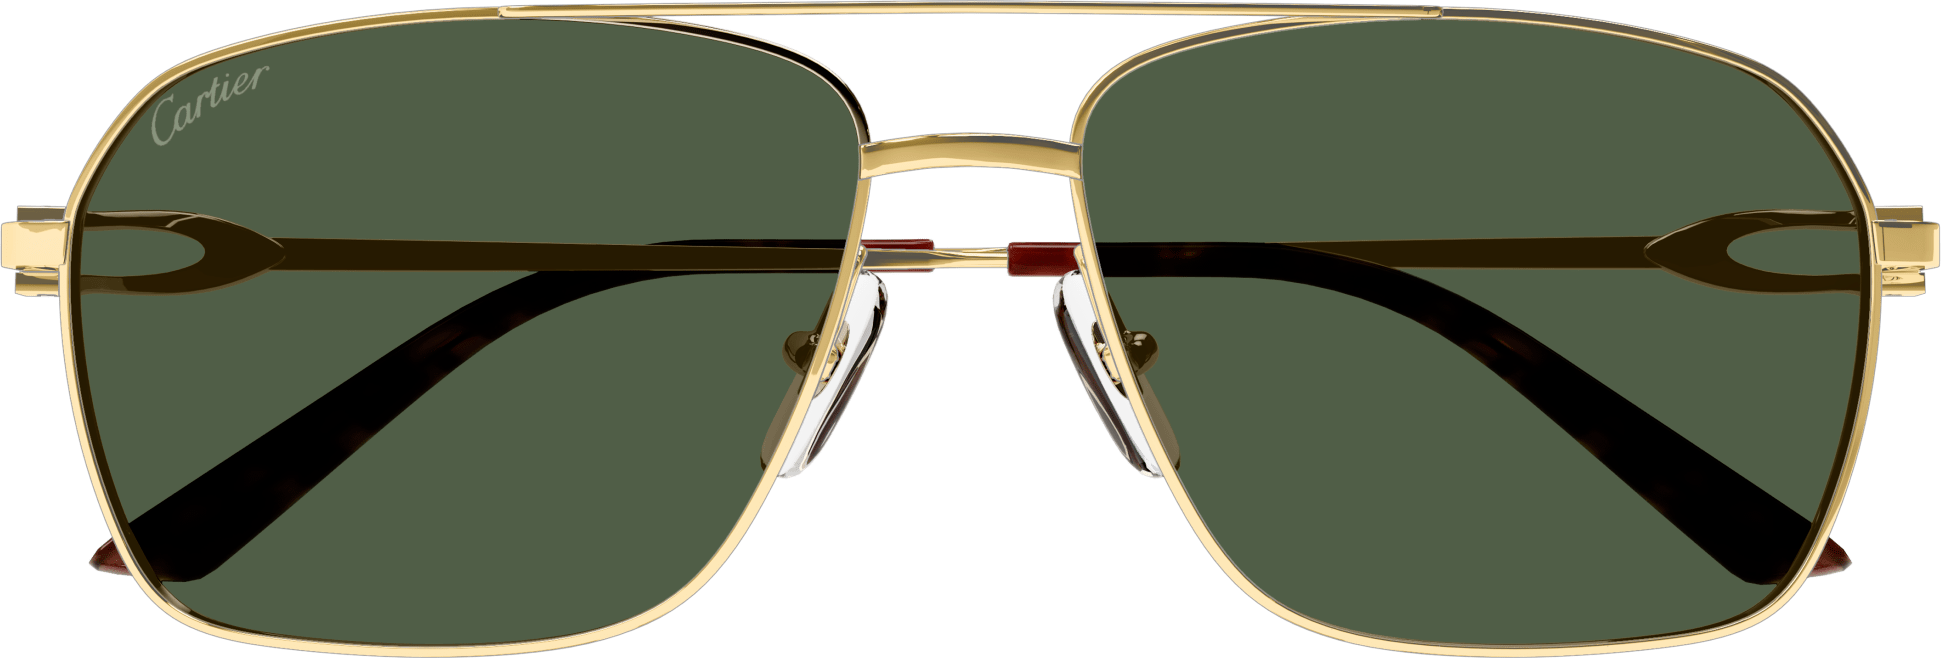 Color_CT0306S-002 - GOLD - GREEN - AR (ANTI REFLECTIVE)